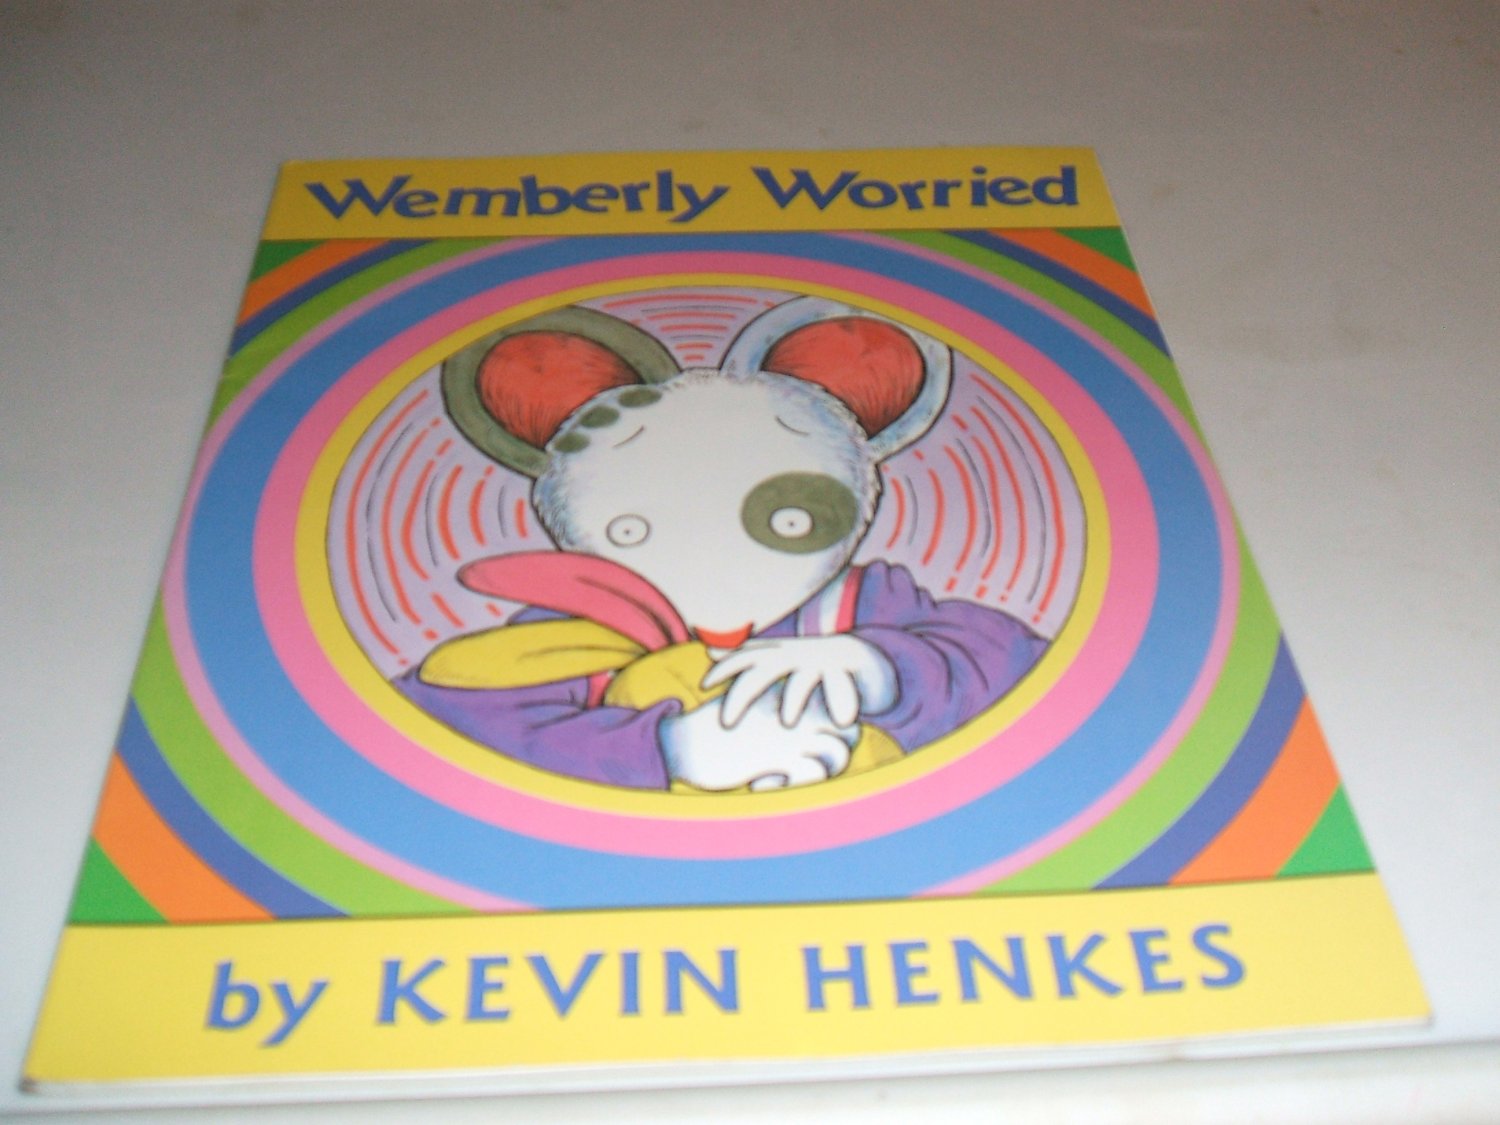 wemberly worried by kevin henkes